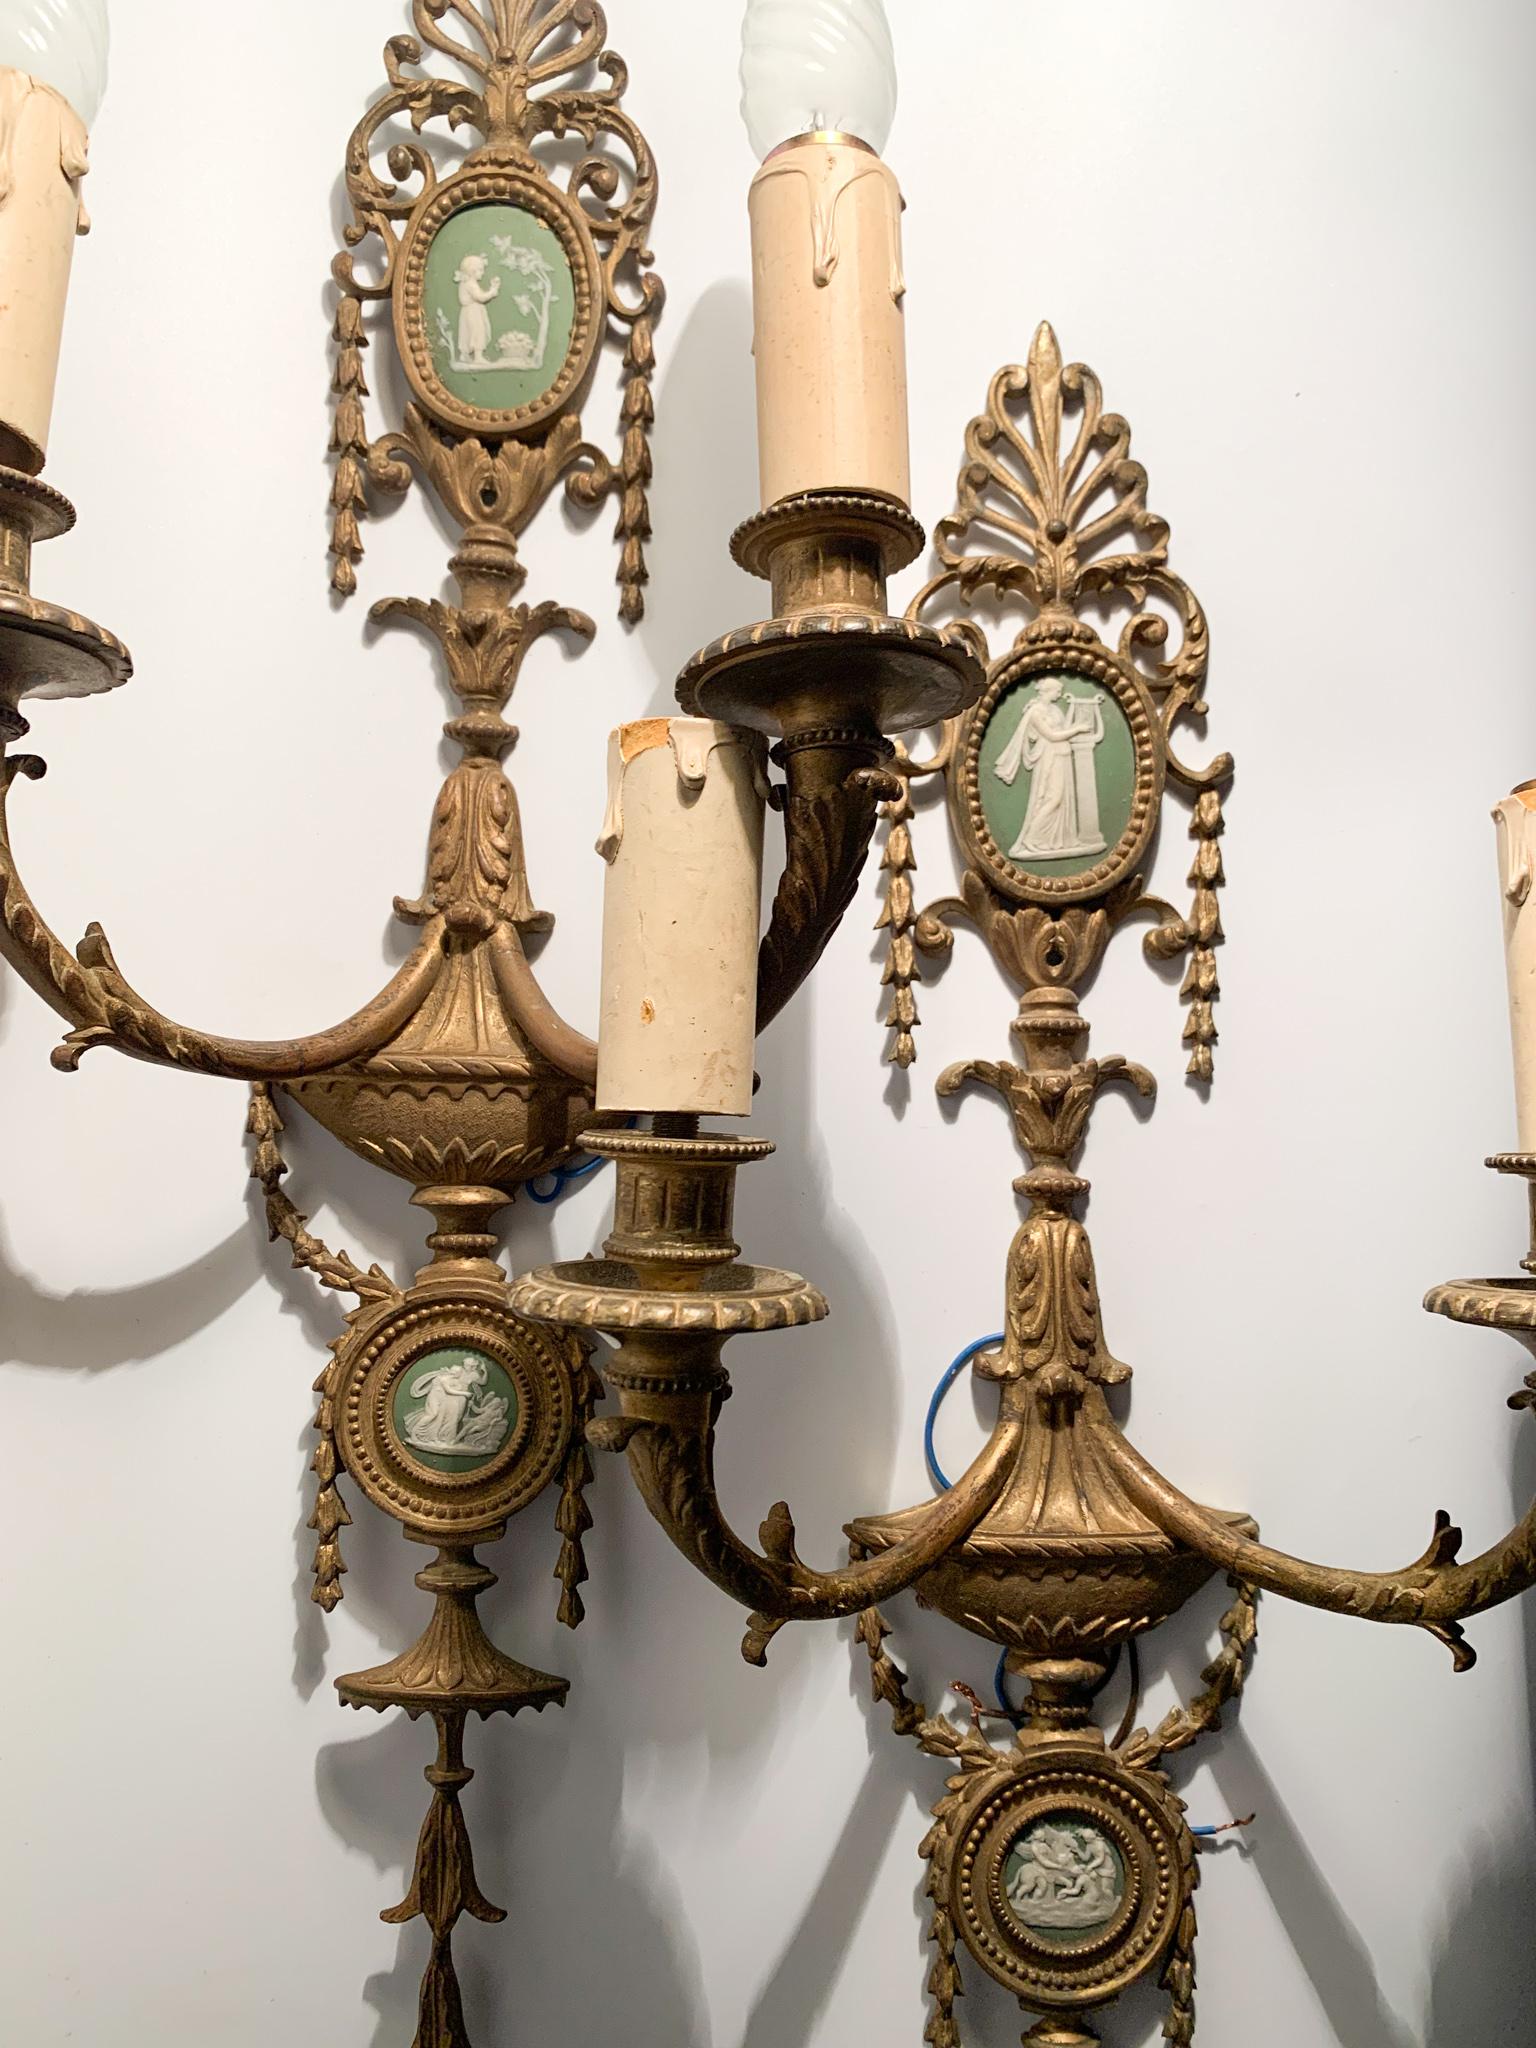 Pair of bronze appliques made in the 1800s, each of which has a pair of original hand-sculpted cameos with different scenes / views

Both lights come with wiring and wiring, which you can mount directly to the wall

Measures: Ø cm 25 Ø cm 14 h